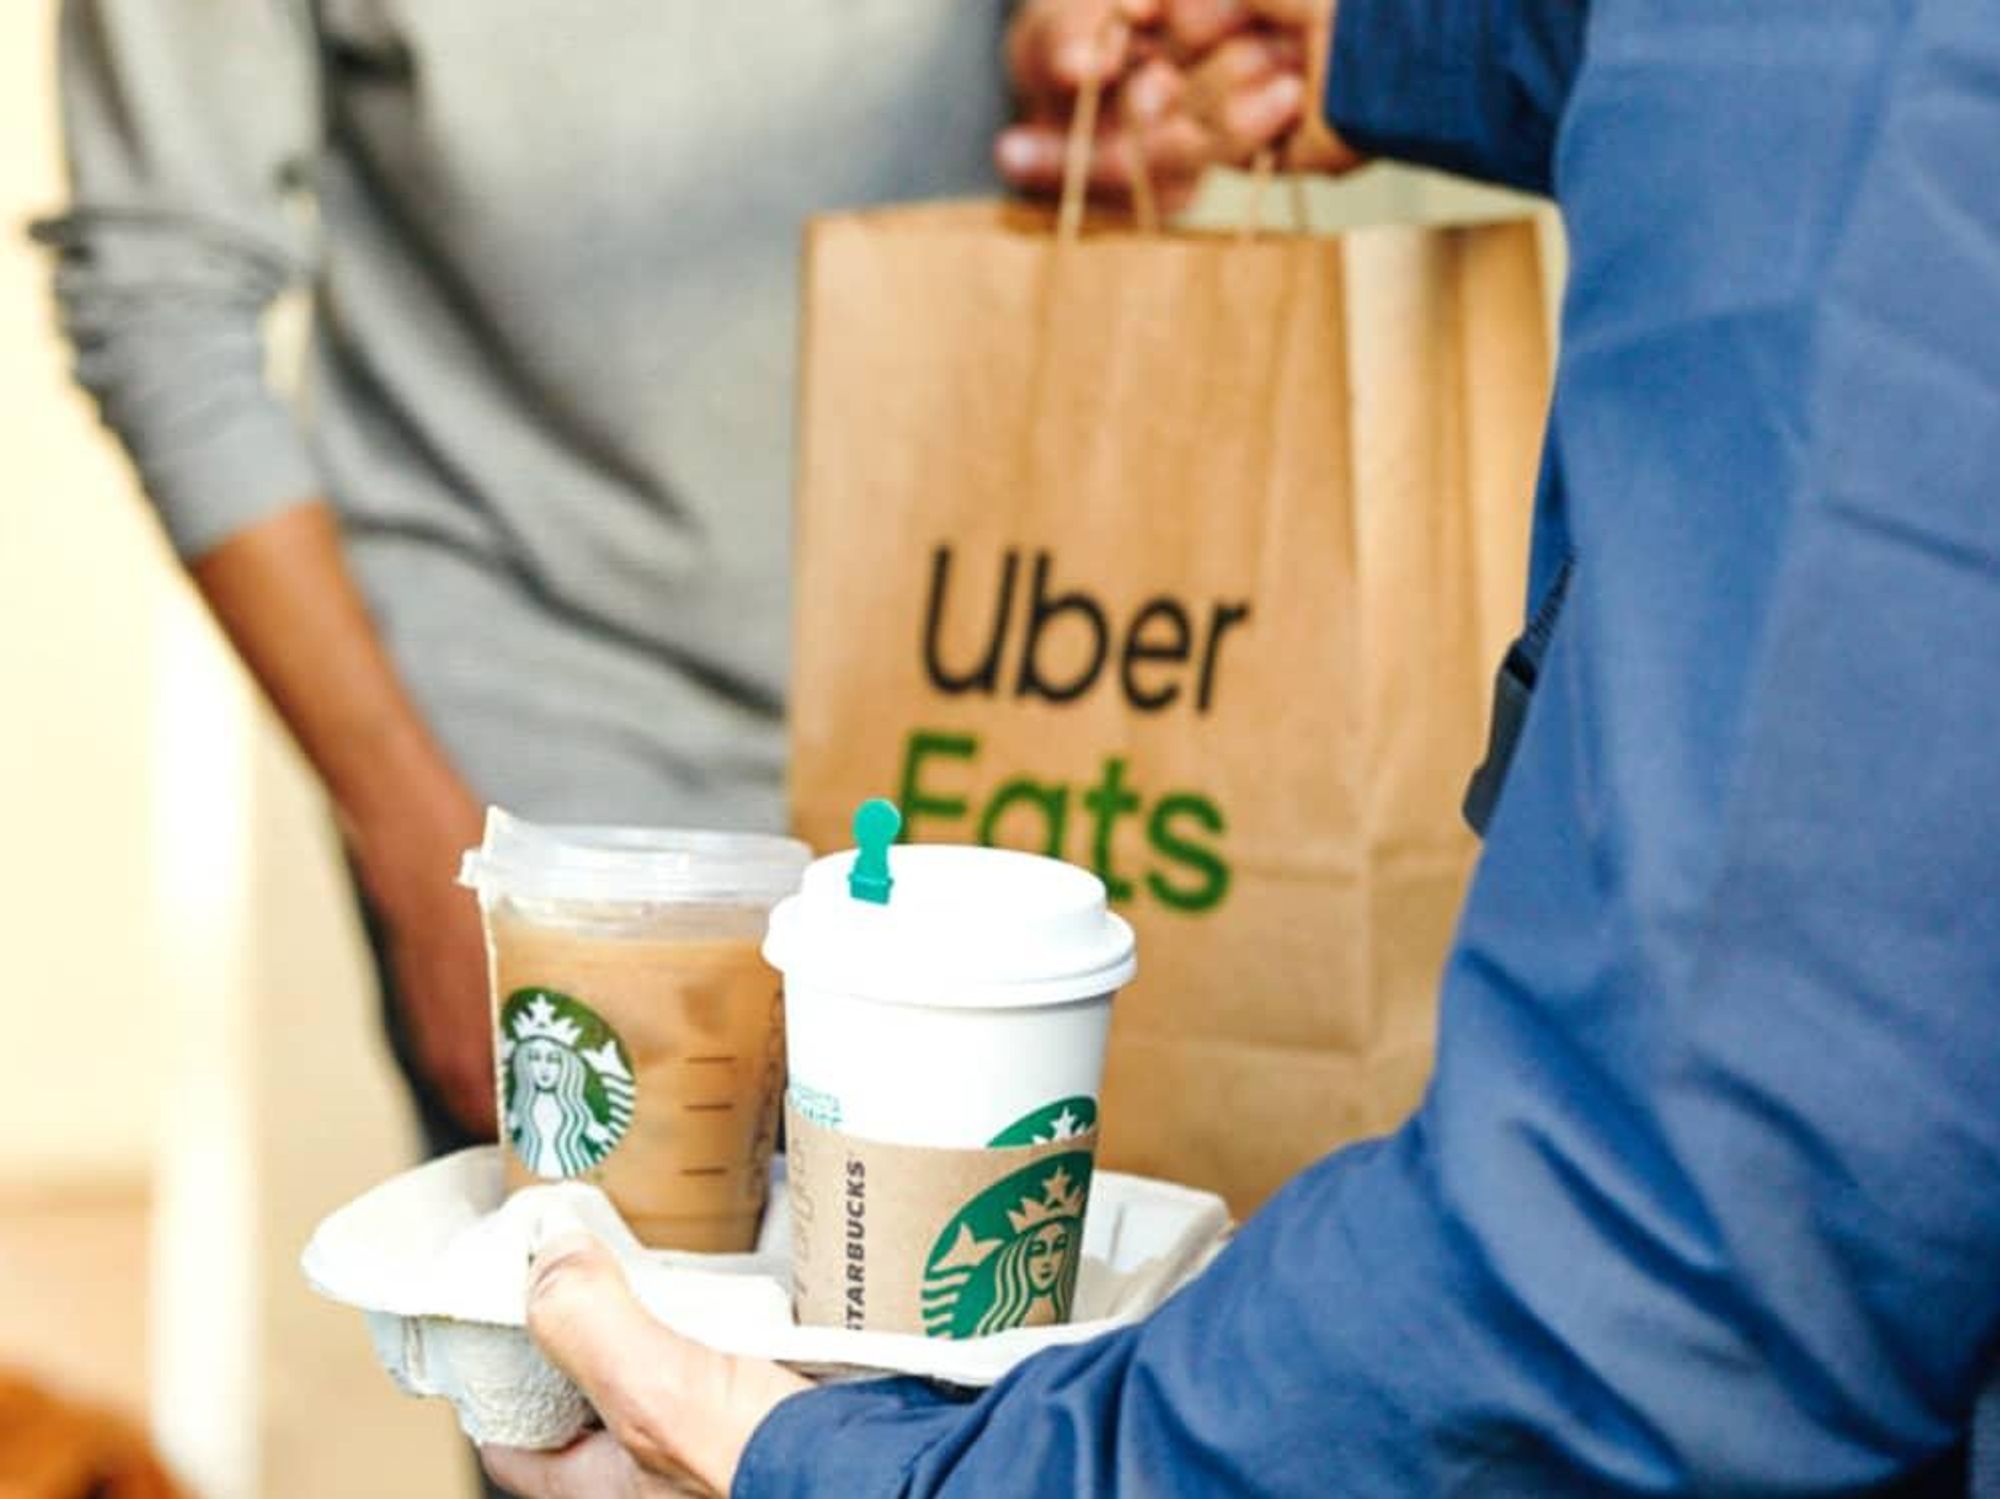 https://houston.culturemap.com/media-library/starbucks-delivers-houston-uber-eats-home-delivery.jpg?id=31493329&width=2000&height=1500&quality=85&coordinates=0%2C0%2C1%2C0